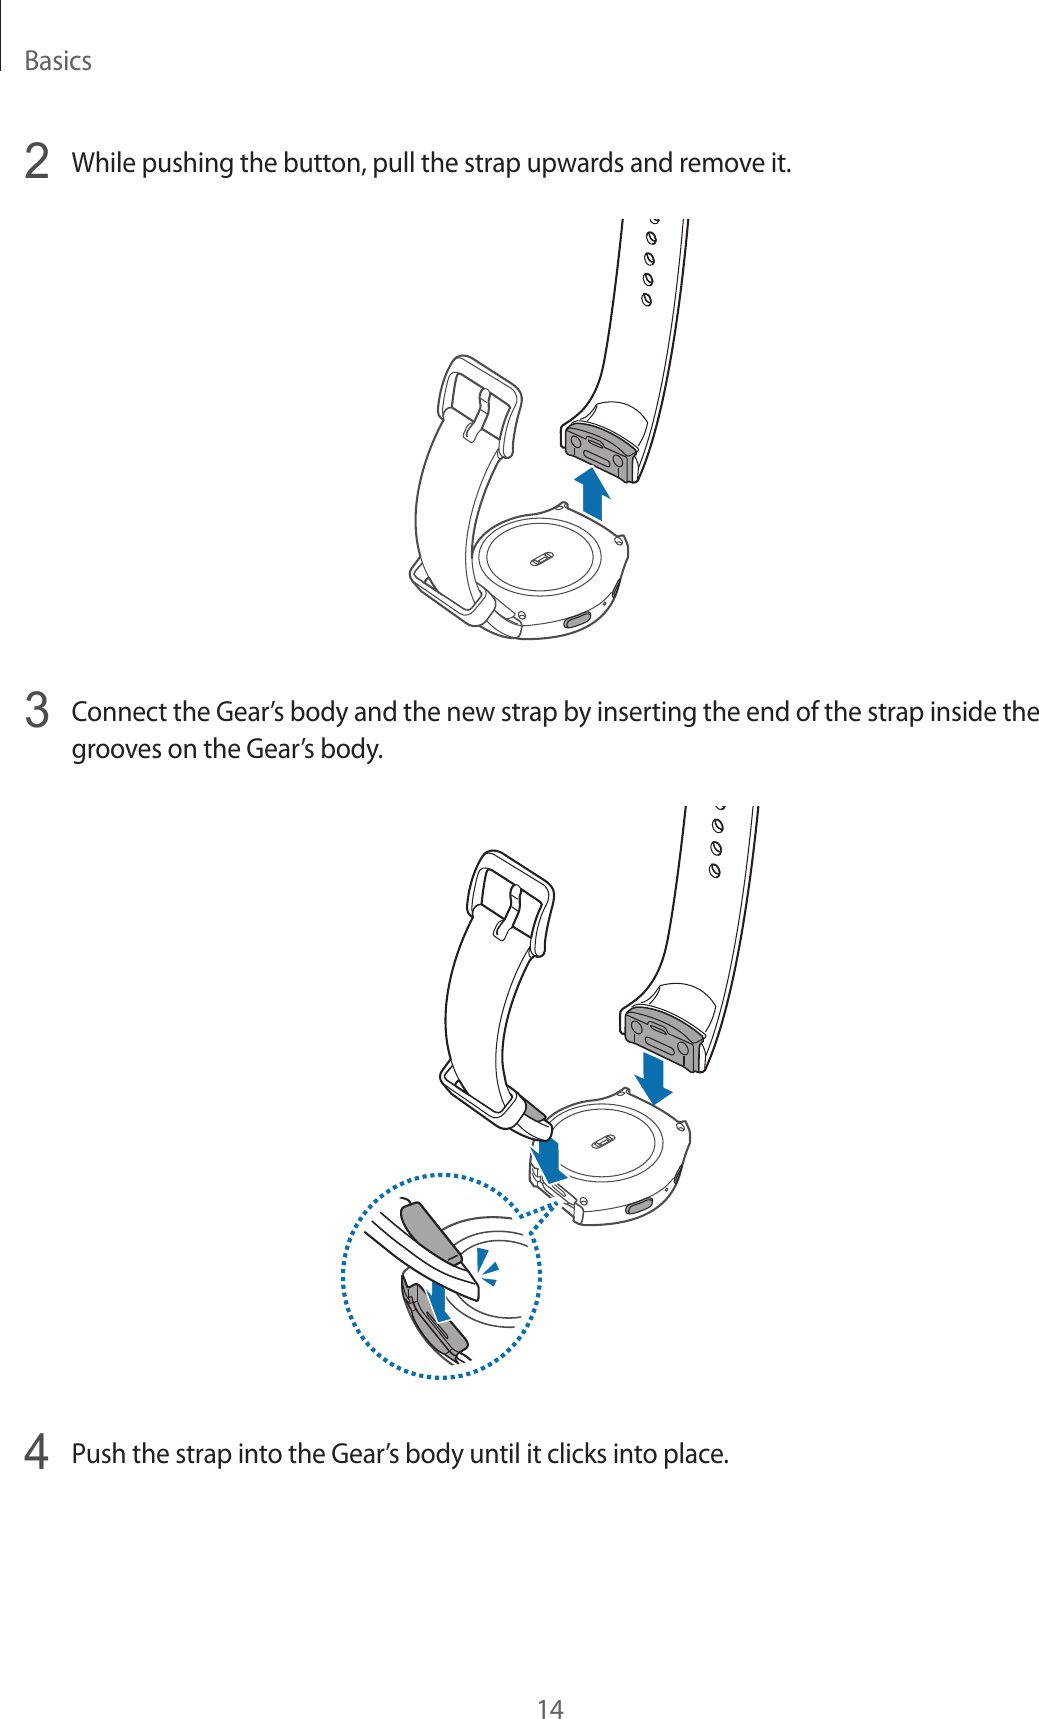 Basics142  While pushing the button, pull the strap upwards and remove it.3  Connect the Gear’s body and the new strap by inserting the end of the strap inside the grooves on the Gear’s body.4  Push the strap into the Gear’s body until it clicks into place.